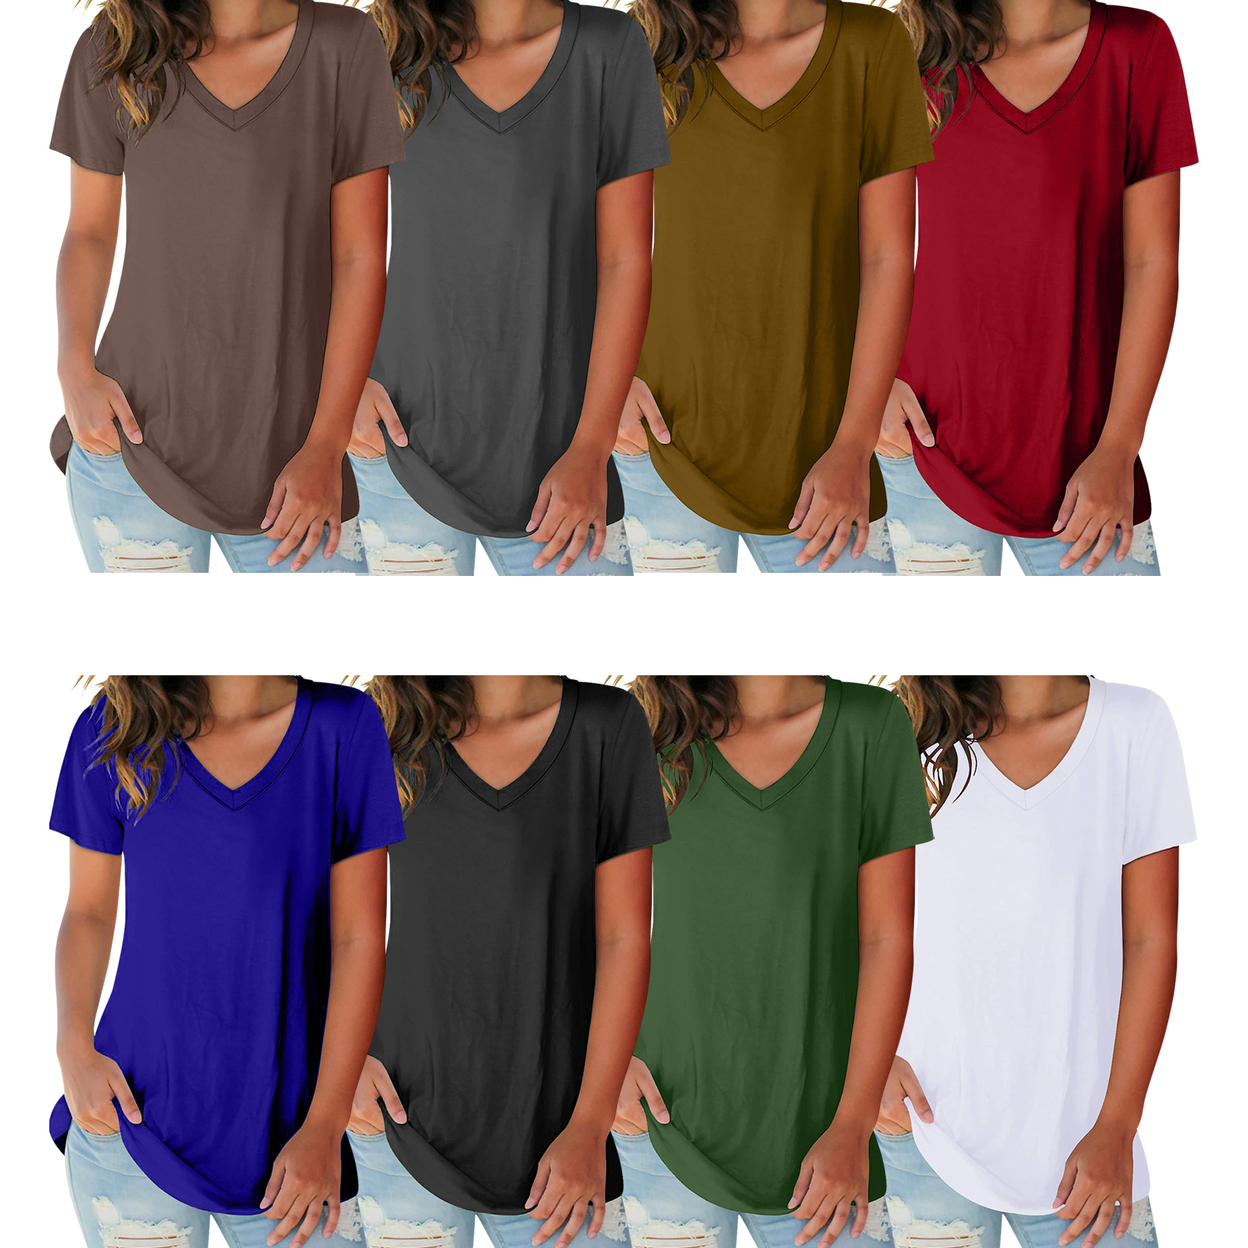 2-Pack: Women's Ultra Soft Smooth Cotton Blend Basic V-Neck Short Sleeve Shirts - White & Brown, Xx-large